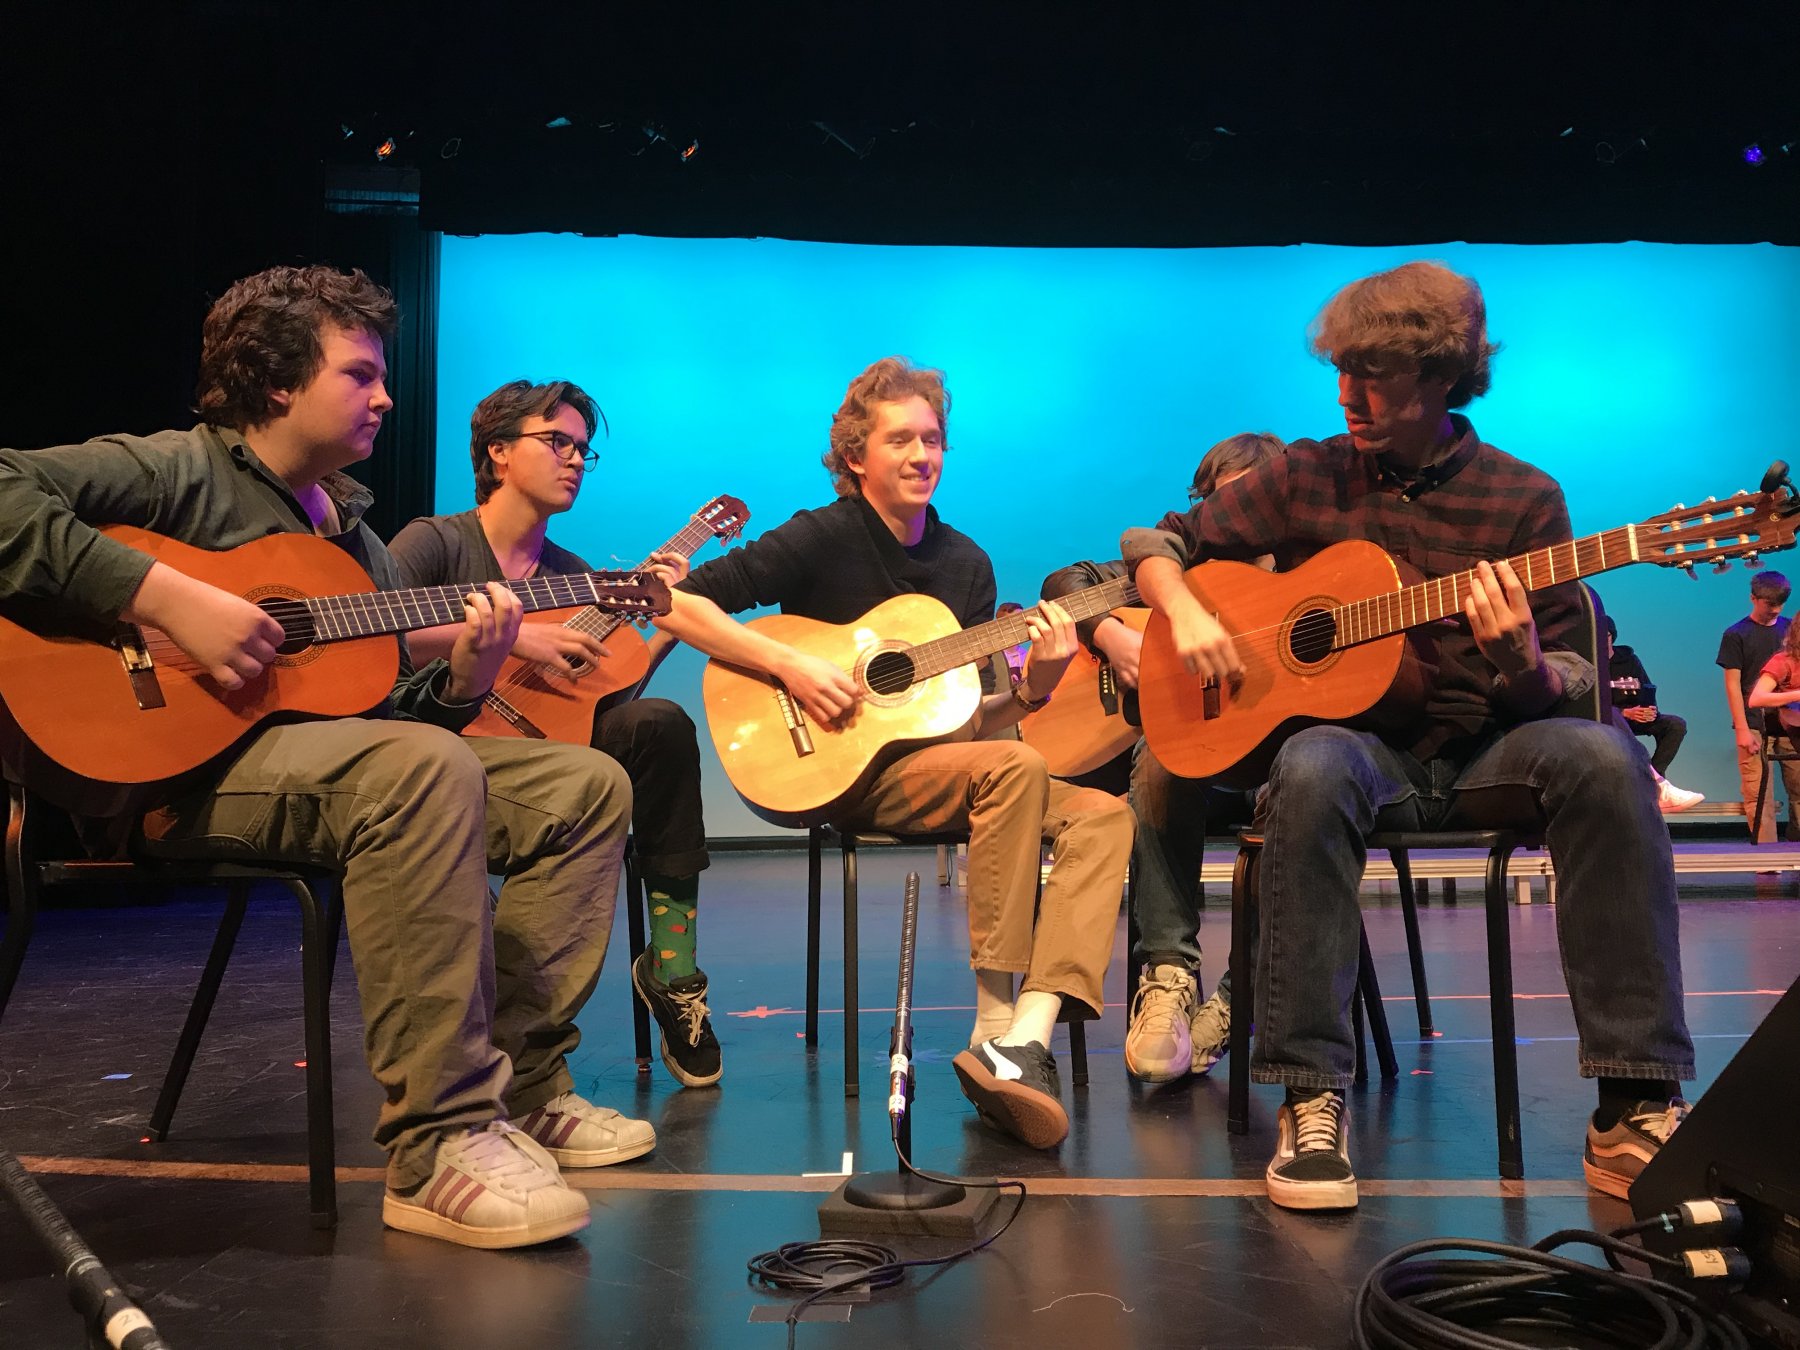 HS Boys play guitar on stage